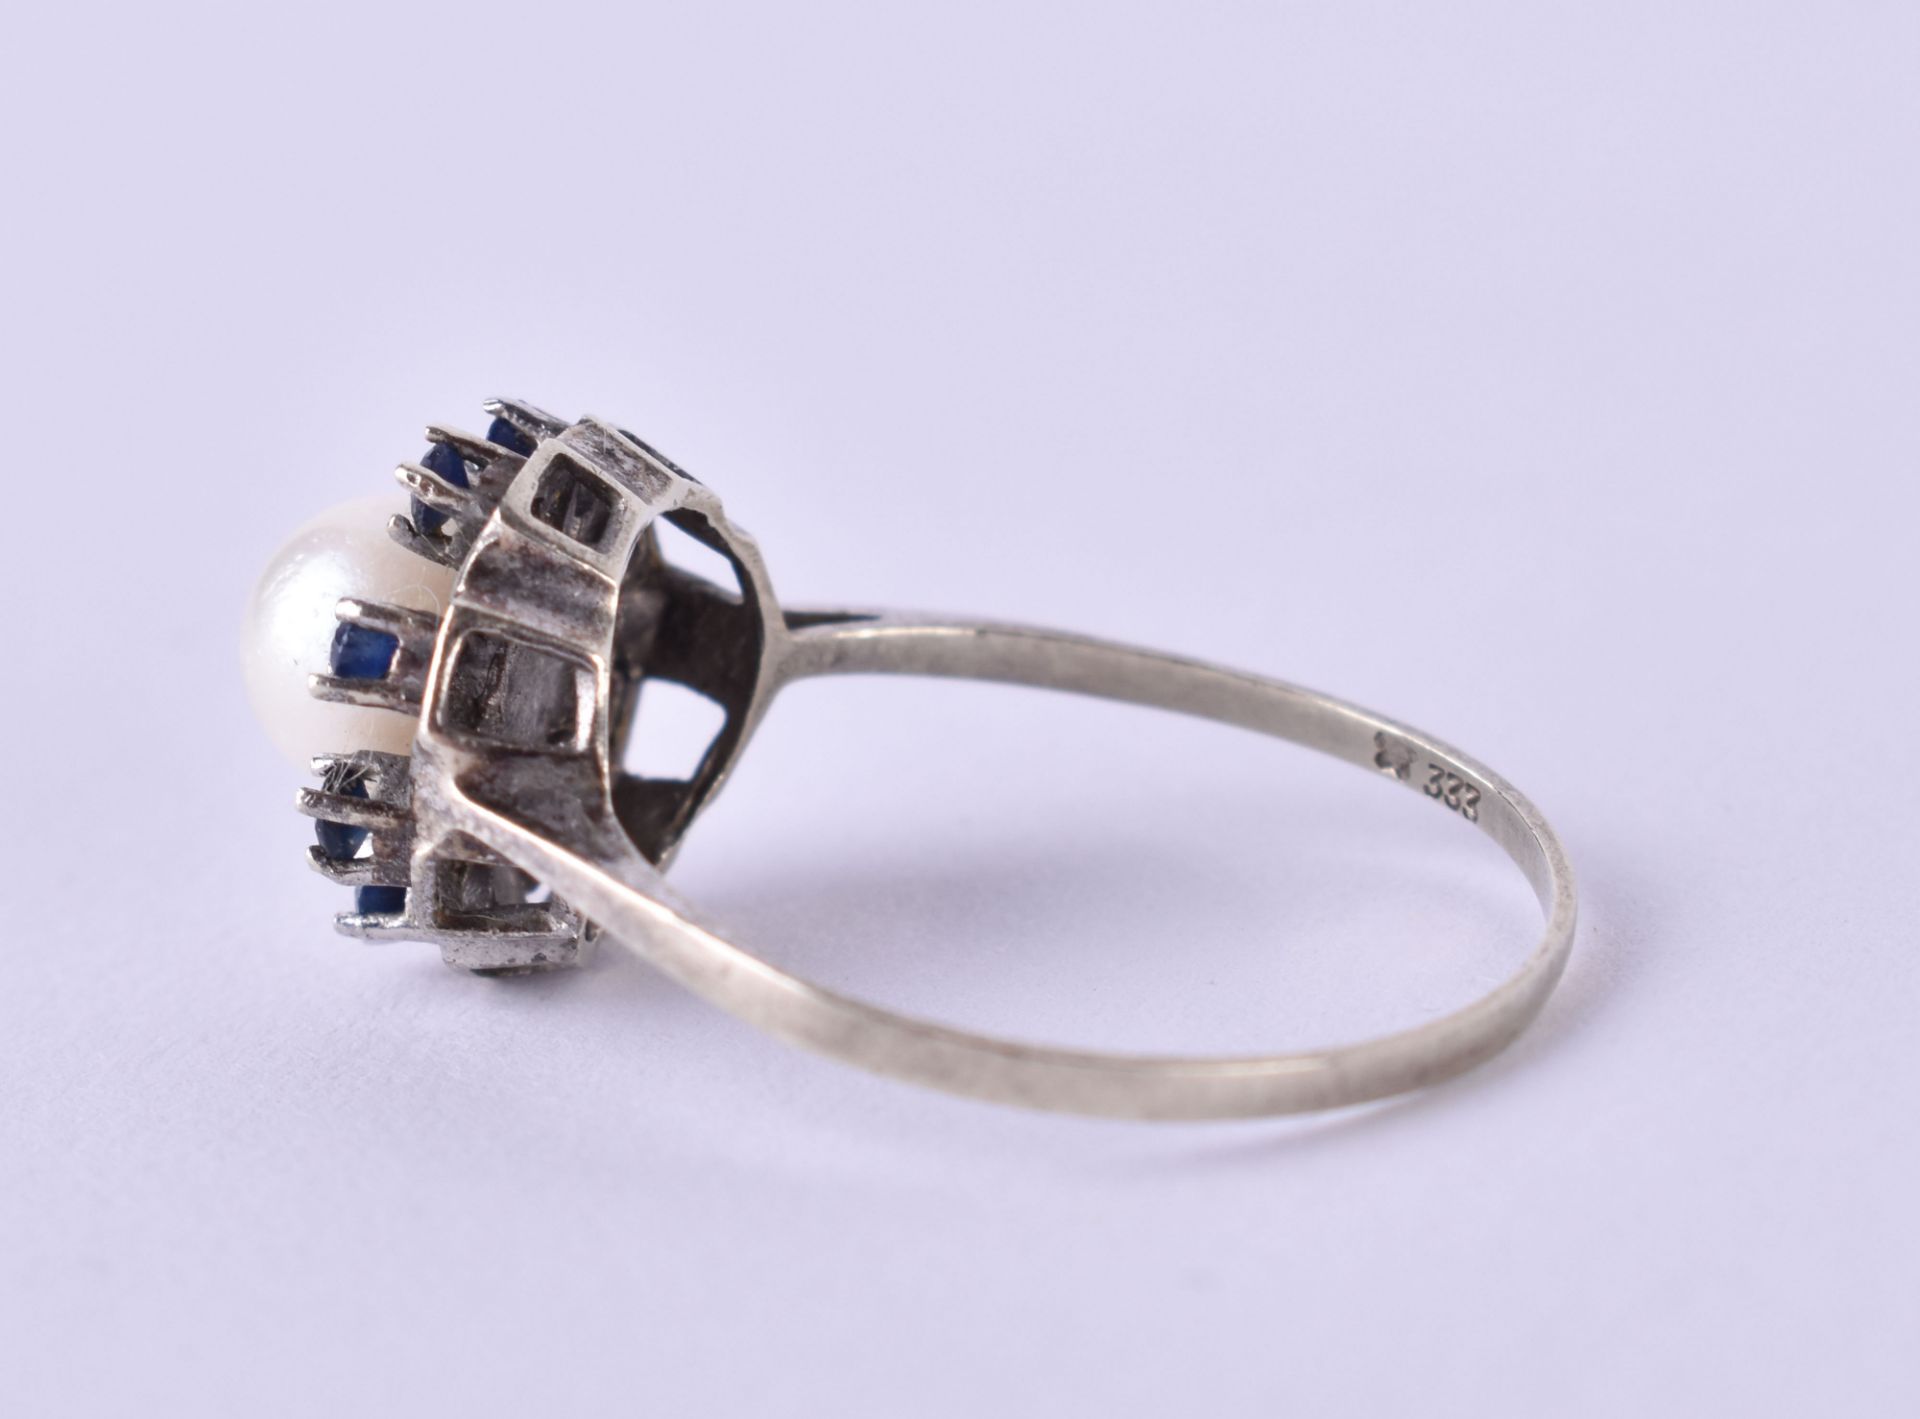 Pearl sapphire ring - Image 3 of 3